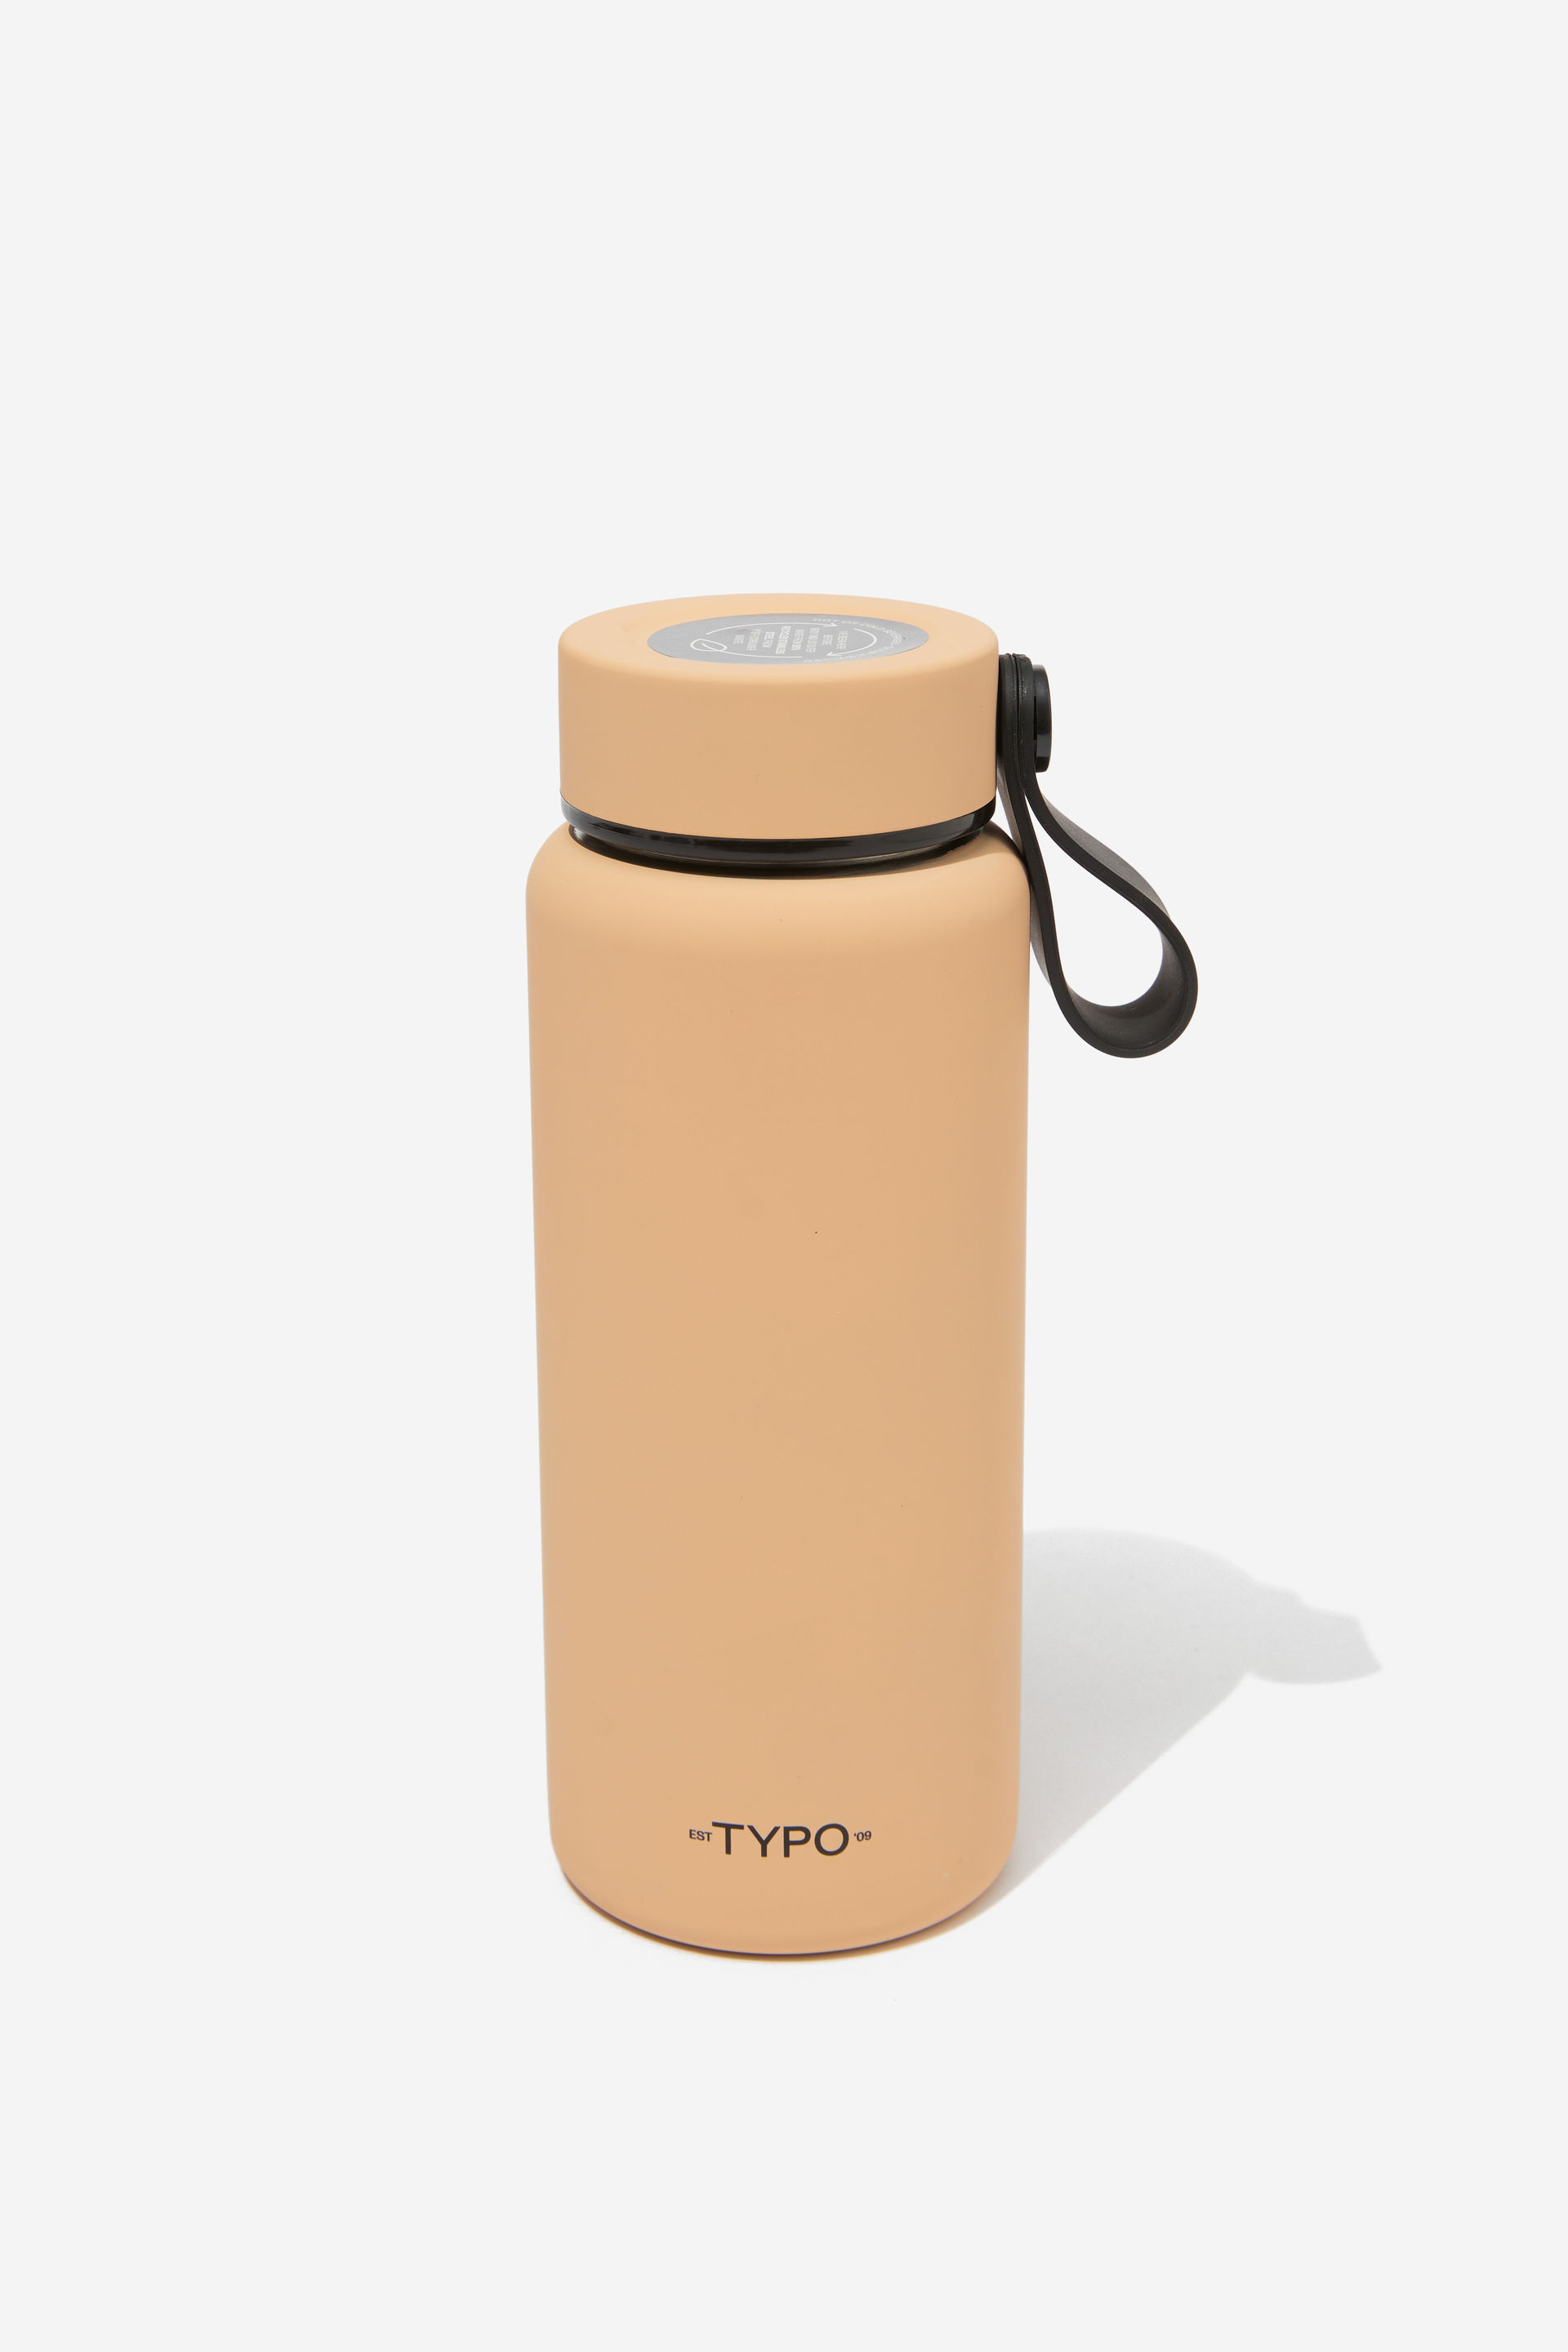 Typo - On The Move Drink Bottle 350ML 2.0 - Latte